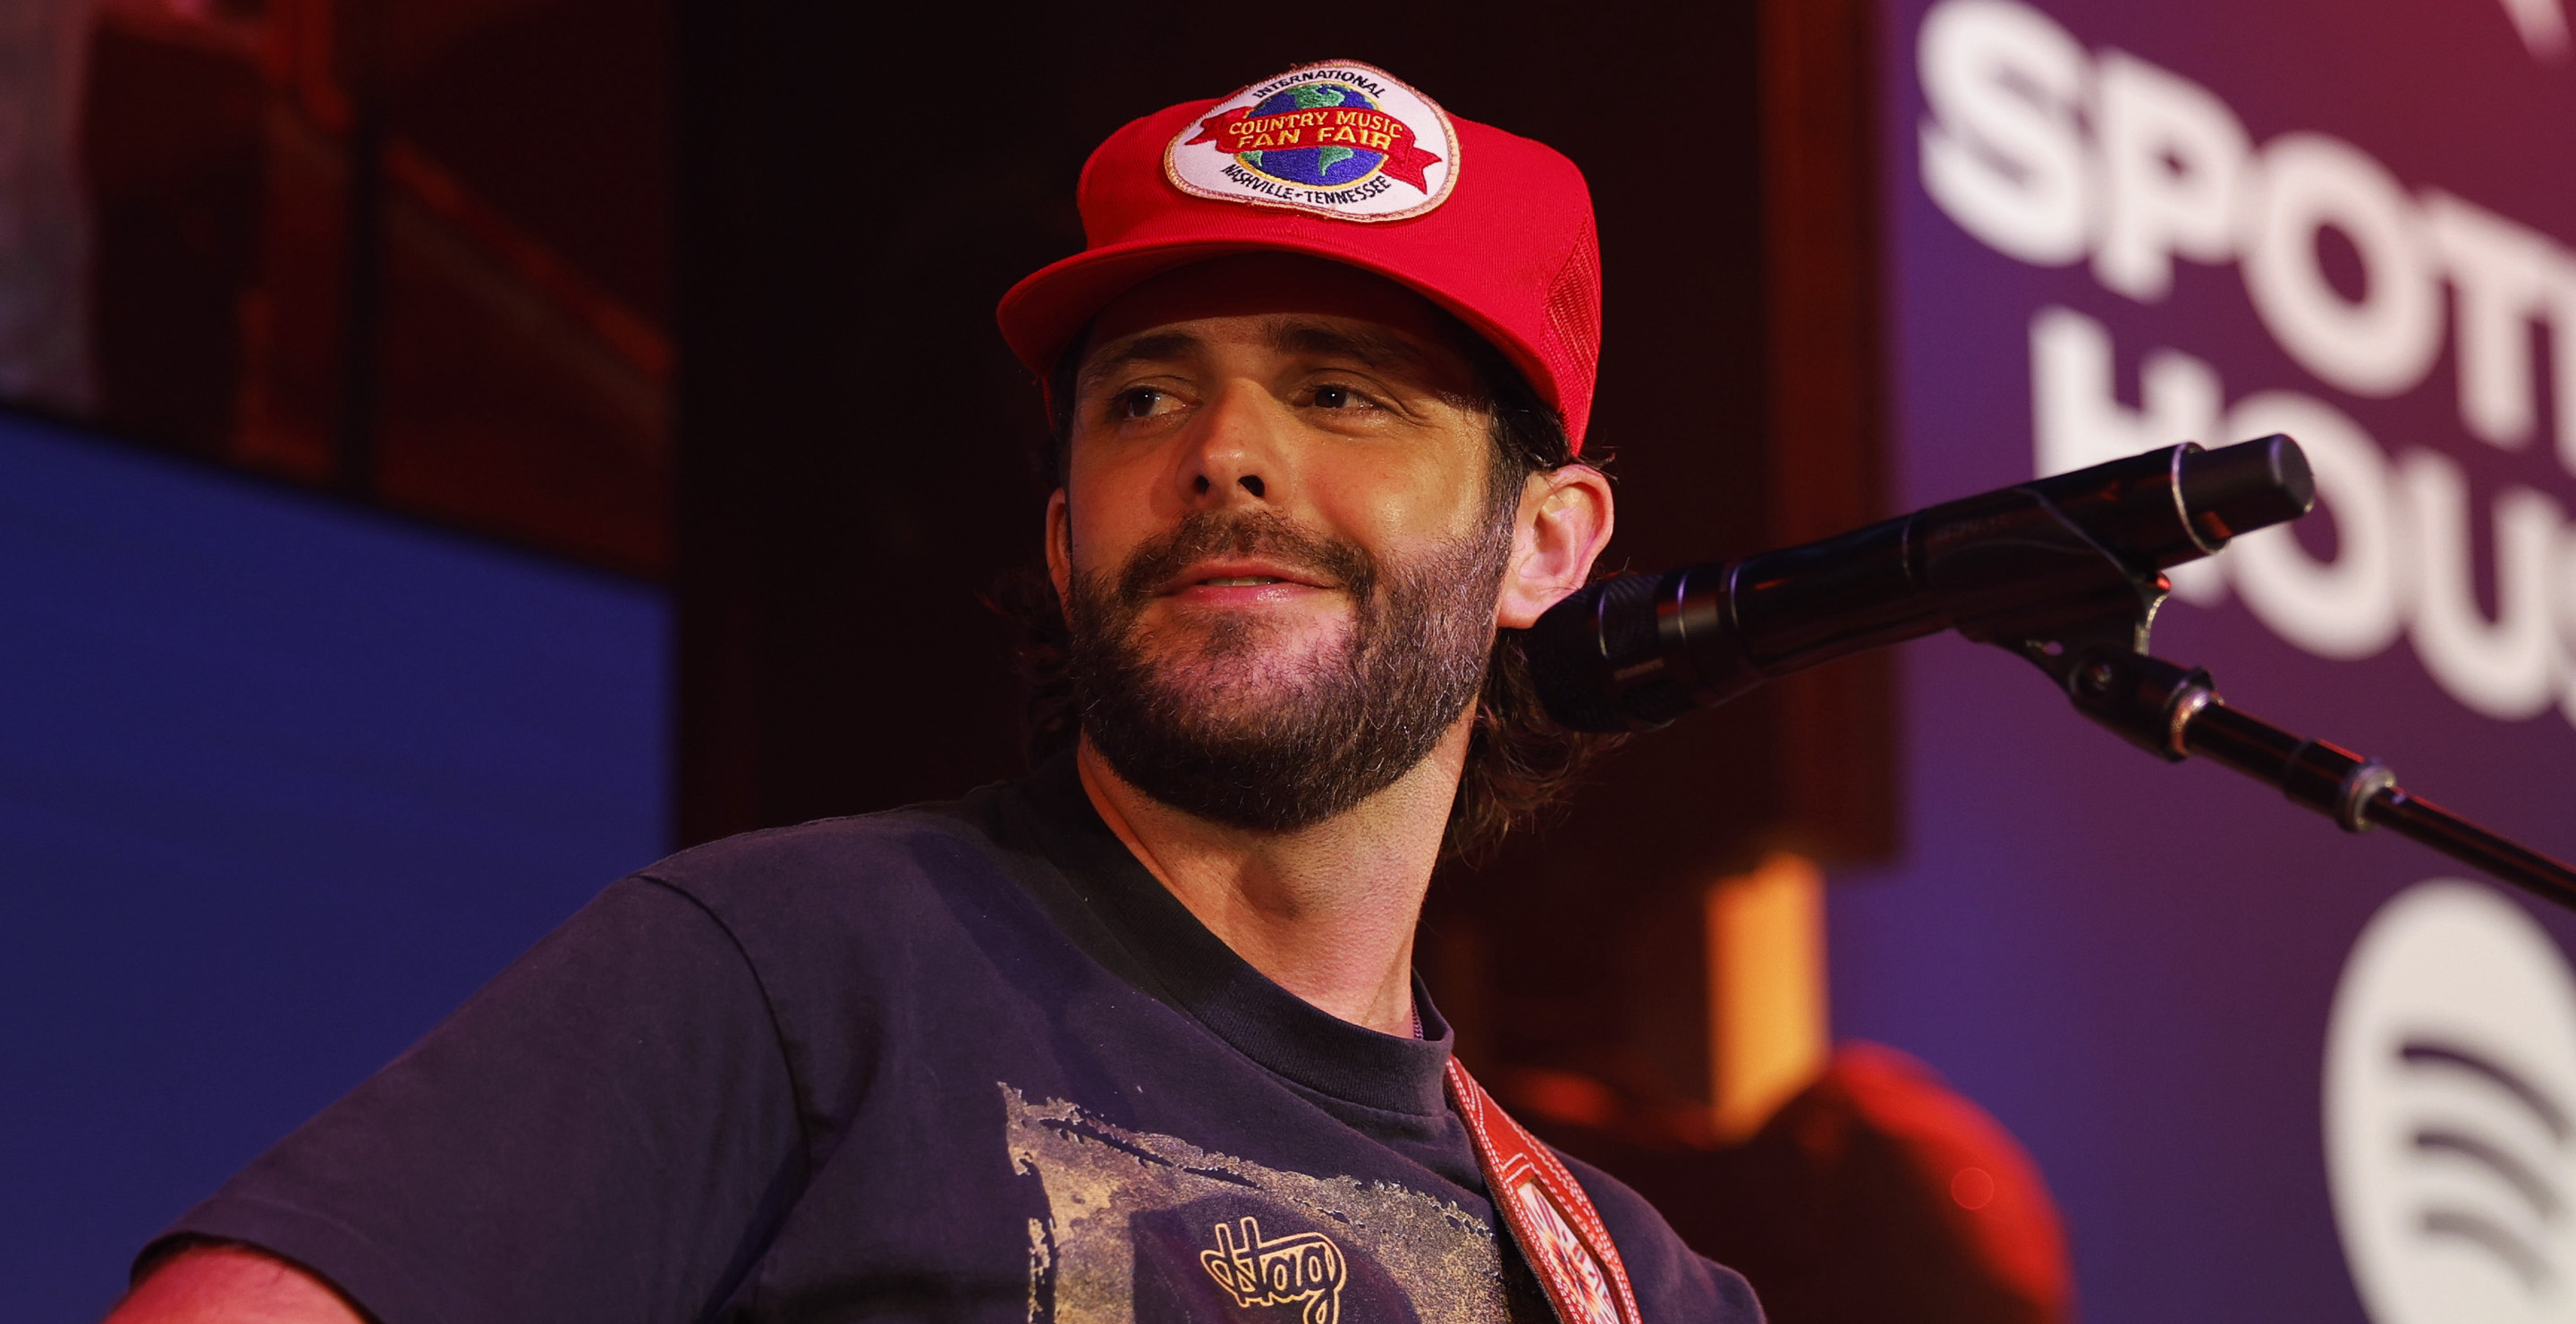 Thomas Rhett's 'About a Woman': Release Date, Track List, & How to Stream